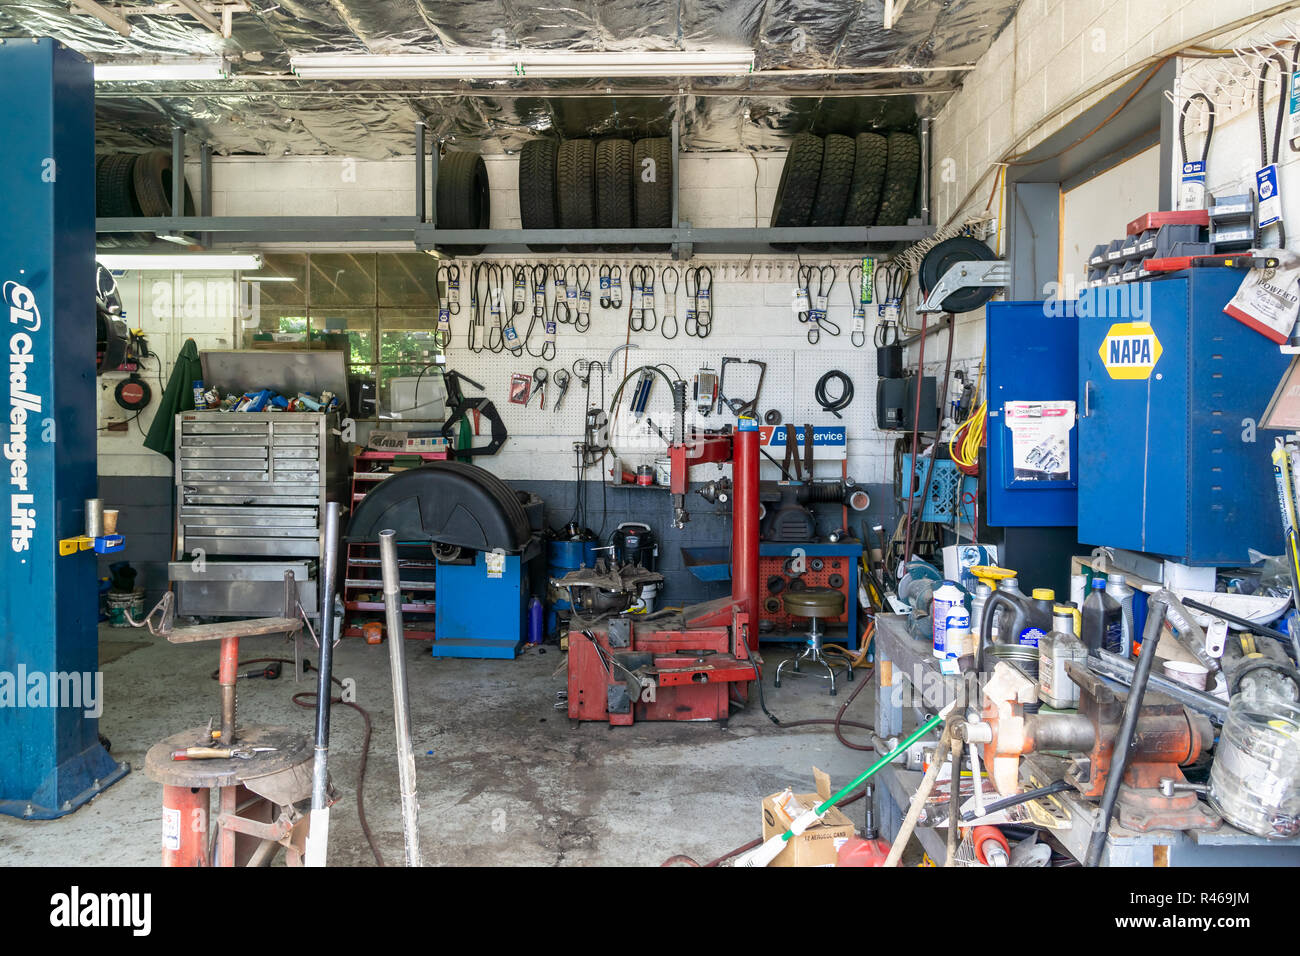 Messy interior of a garage with machines and tools, USA. Stock Photo